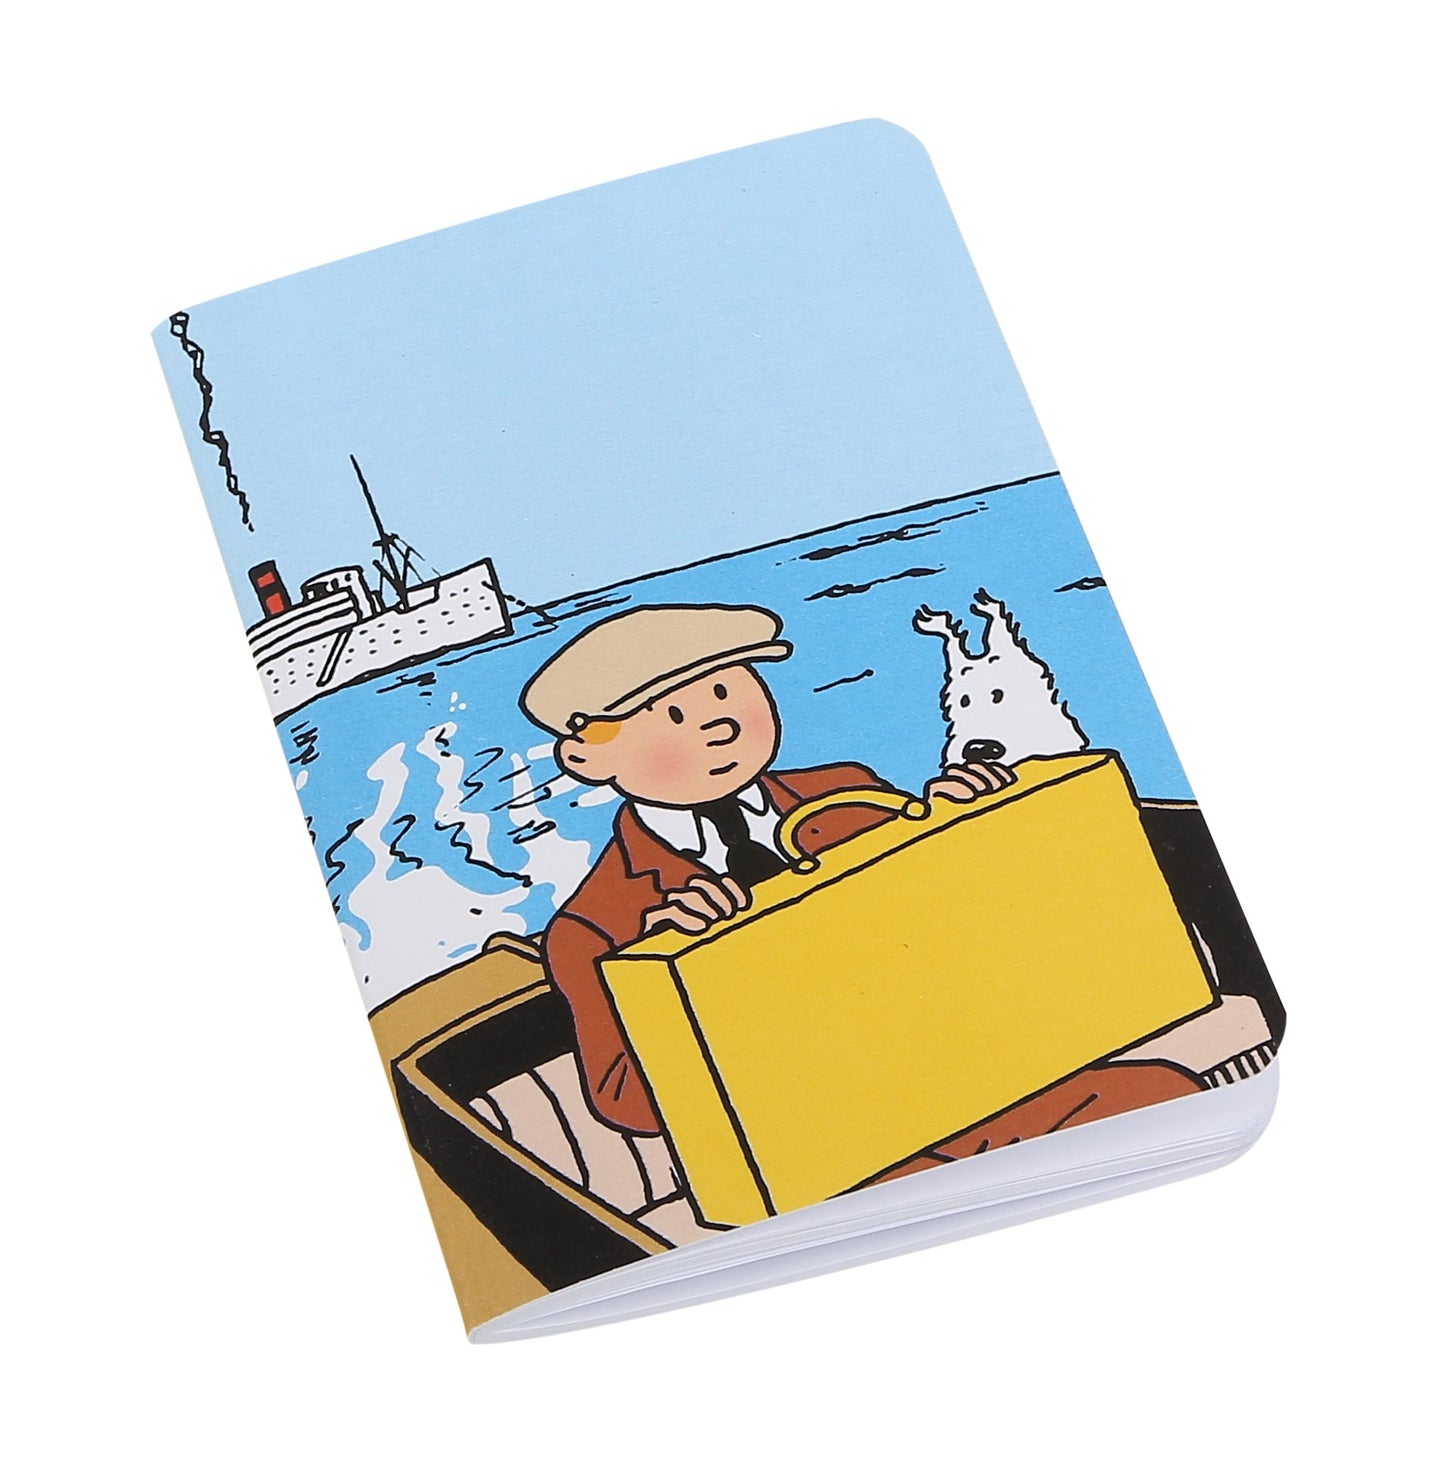 Tintin and Snowy on boat